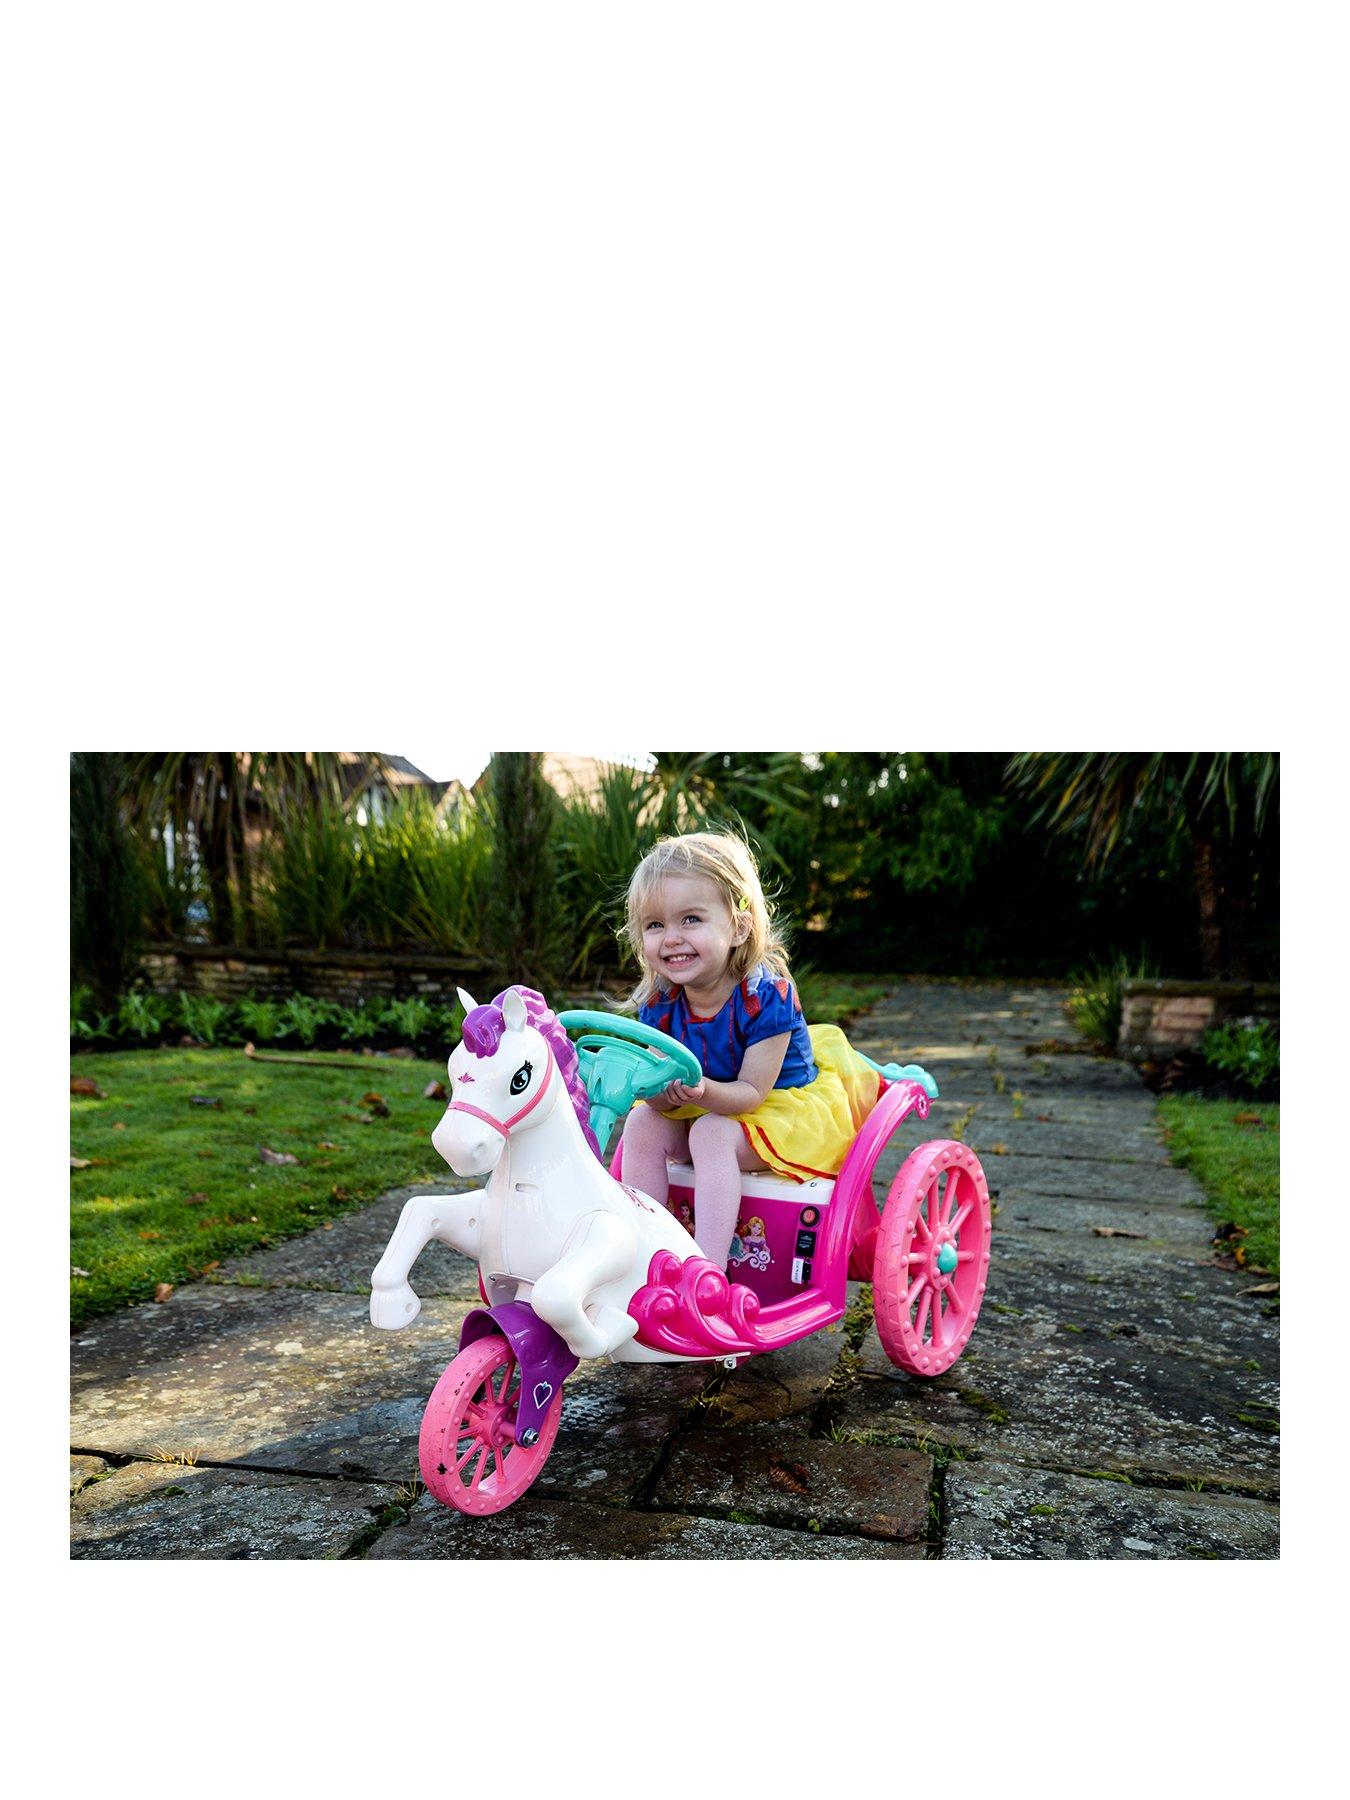 battery operated princess carriage